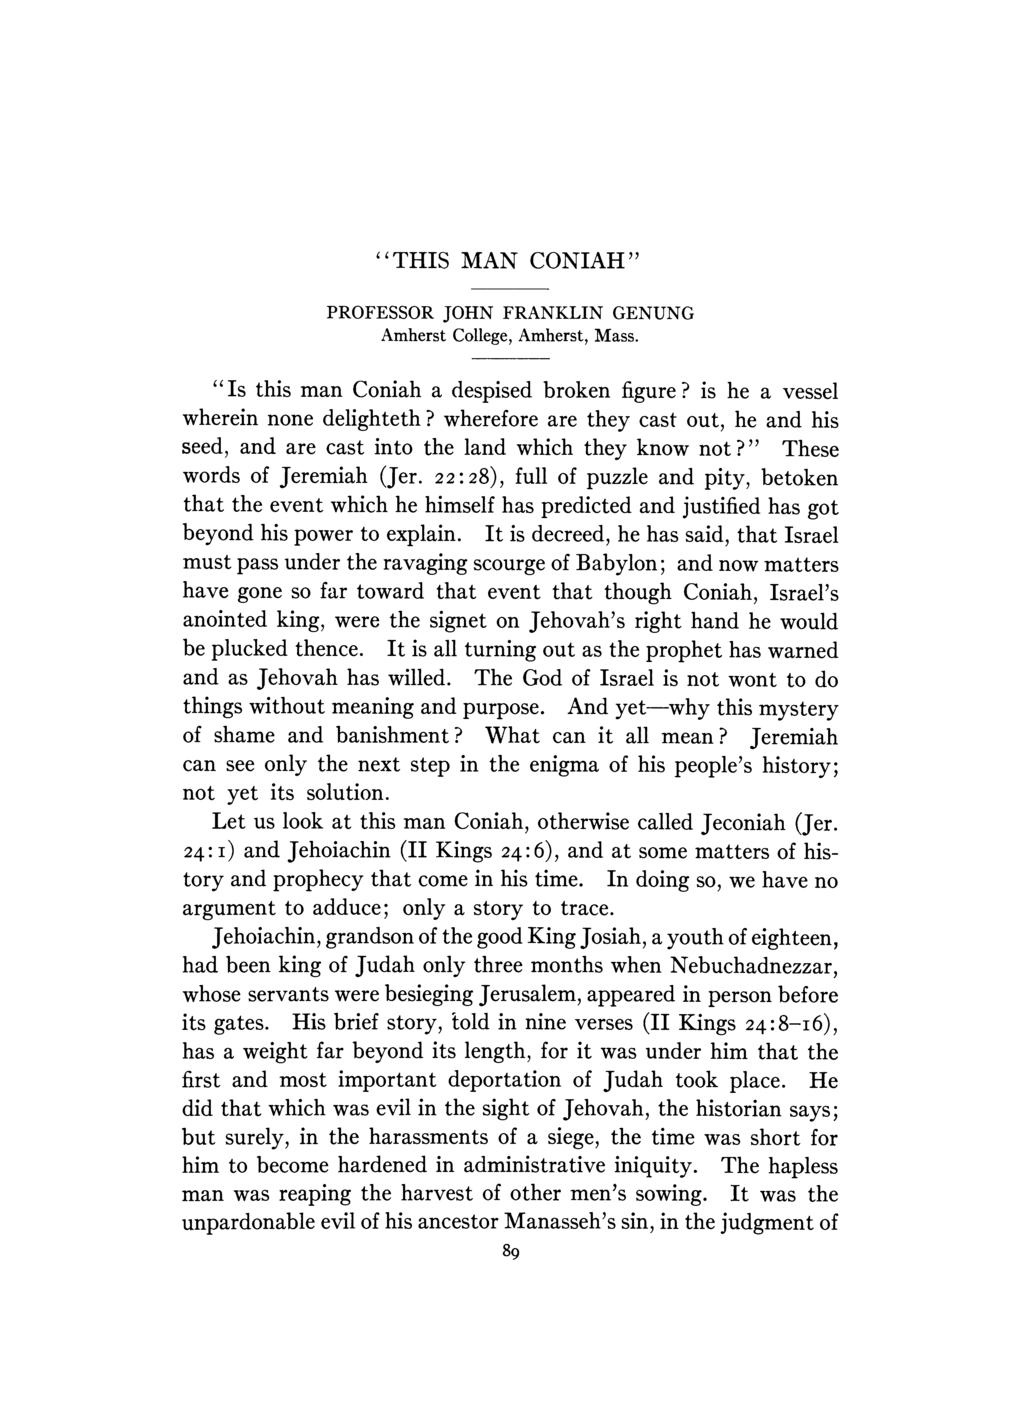 "THIS MAN CONIAH" PROFESSOR JOHN FRANKLIN GENUNG Amherst College, Amherst, Mass. "Is this man Coniah a despised broken figure? is he a vessel wherein none delighteth?